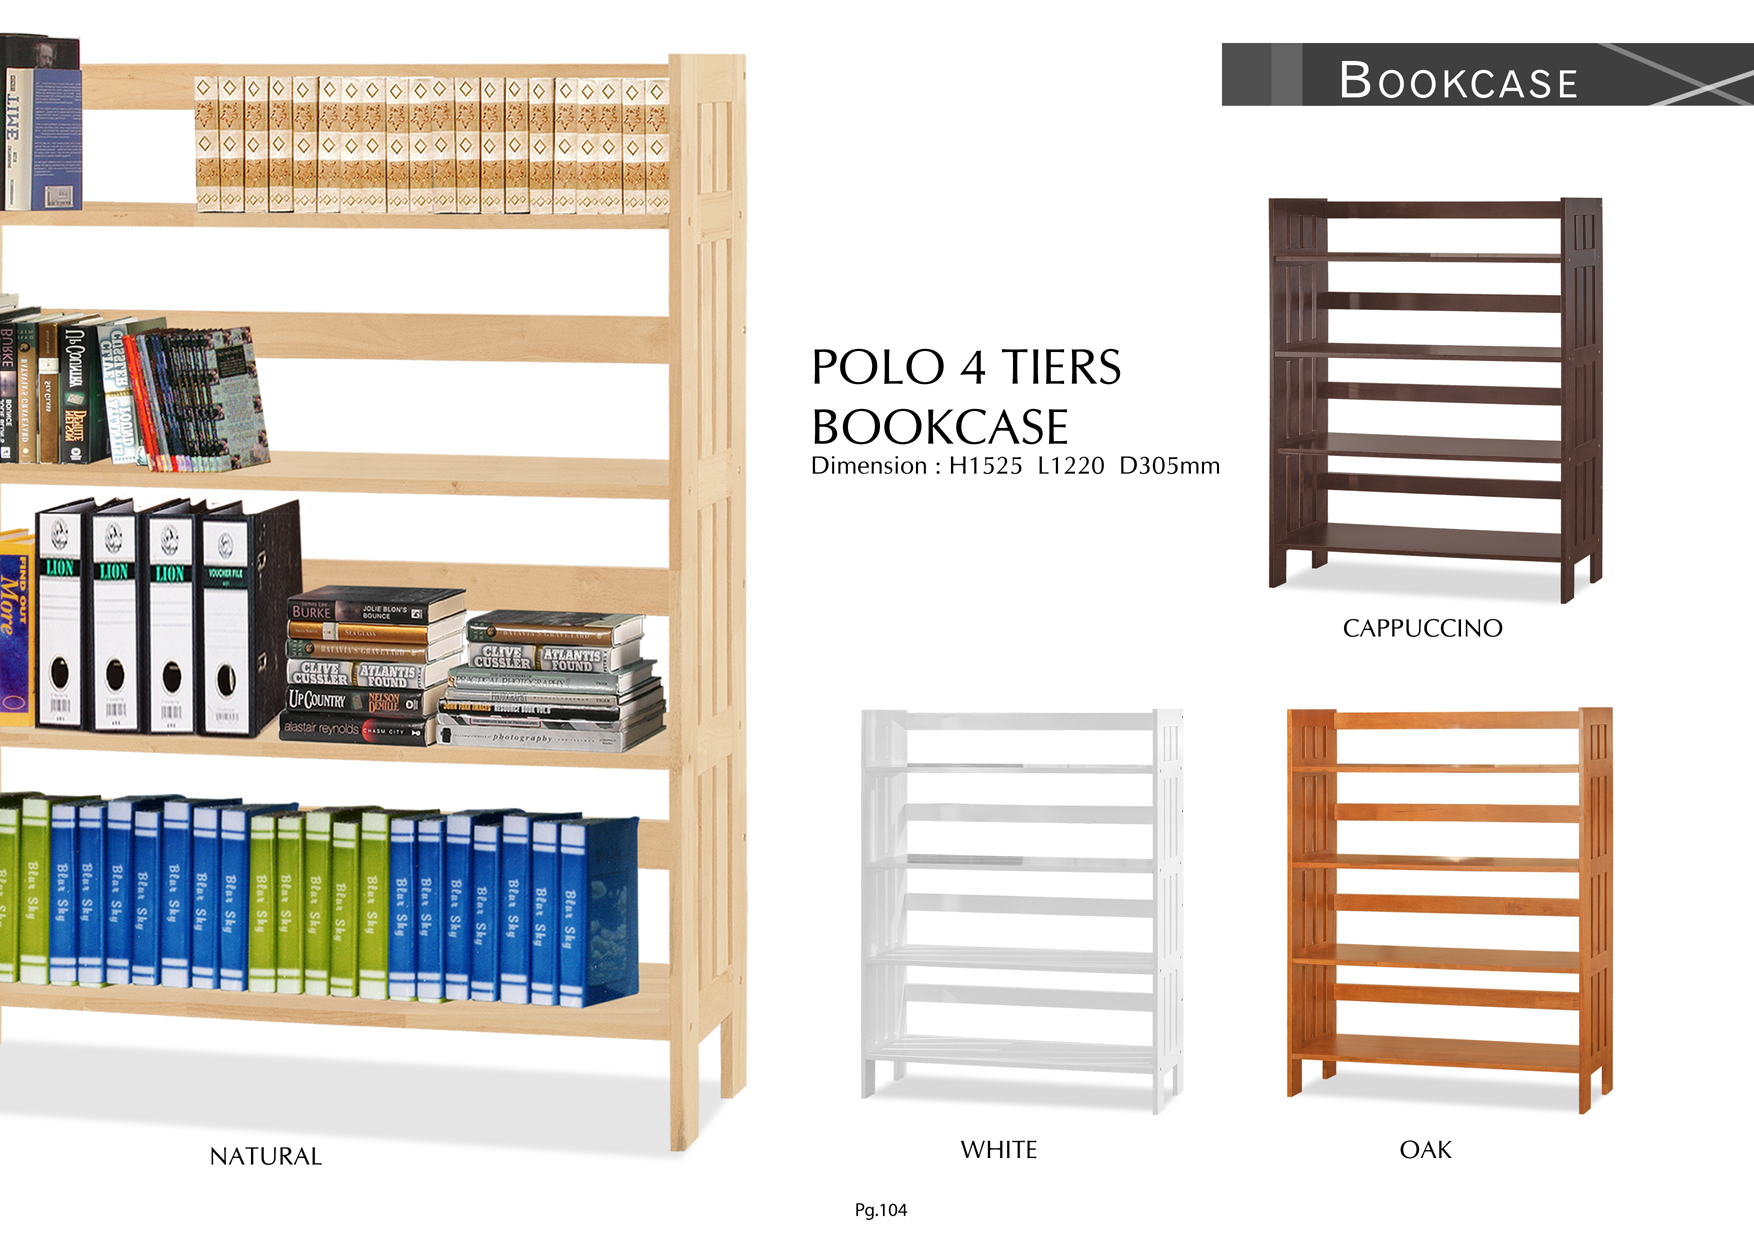 Product: PG104. POLO 4 TIERS BOOK CASE